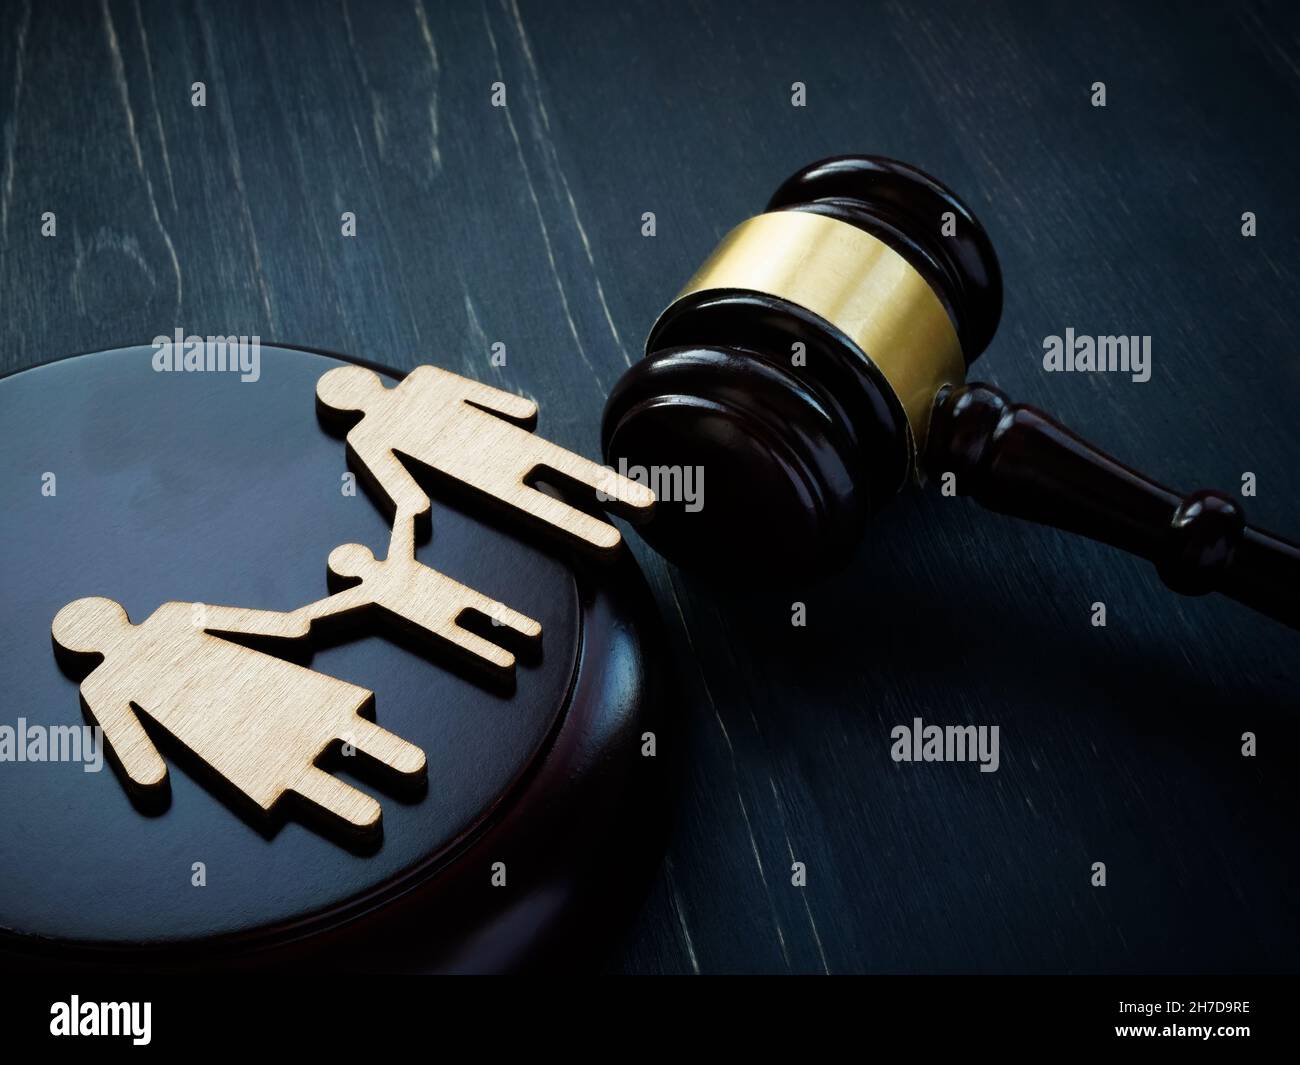 Family figurines and court hammer. Family law and adoption concept. Stock Photo